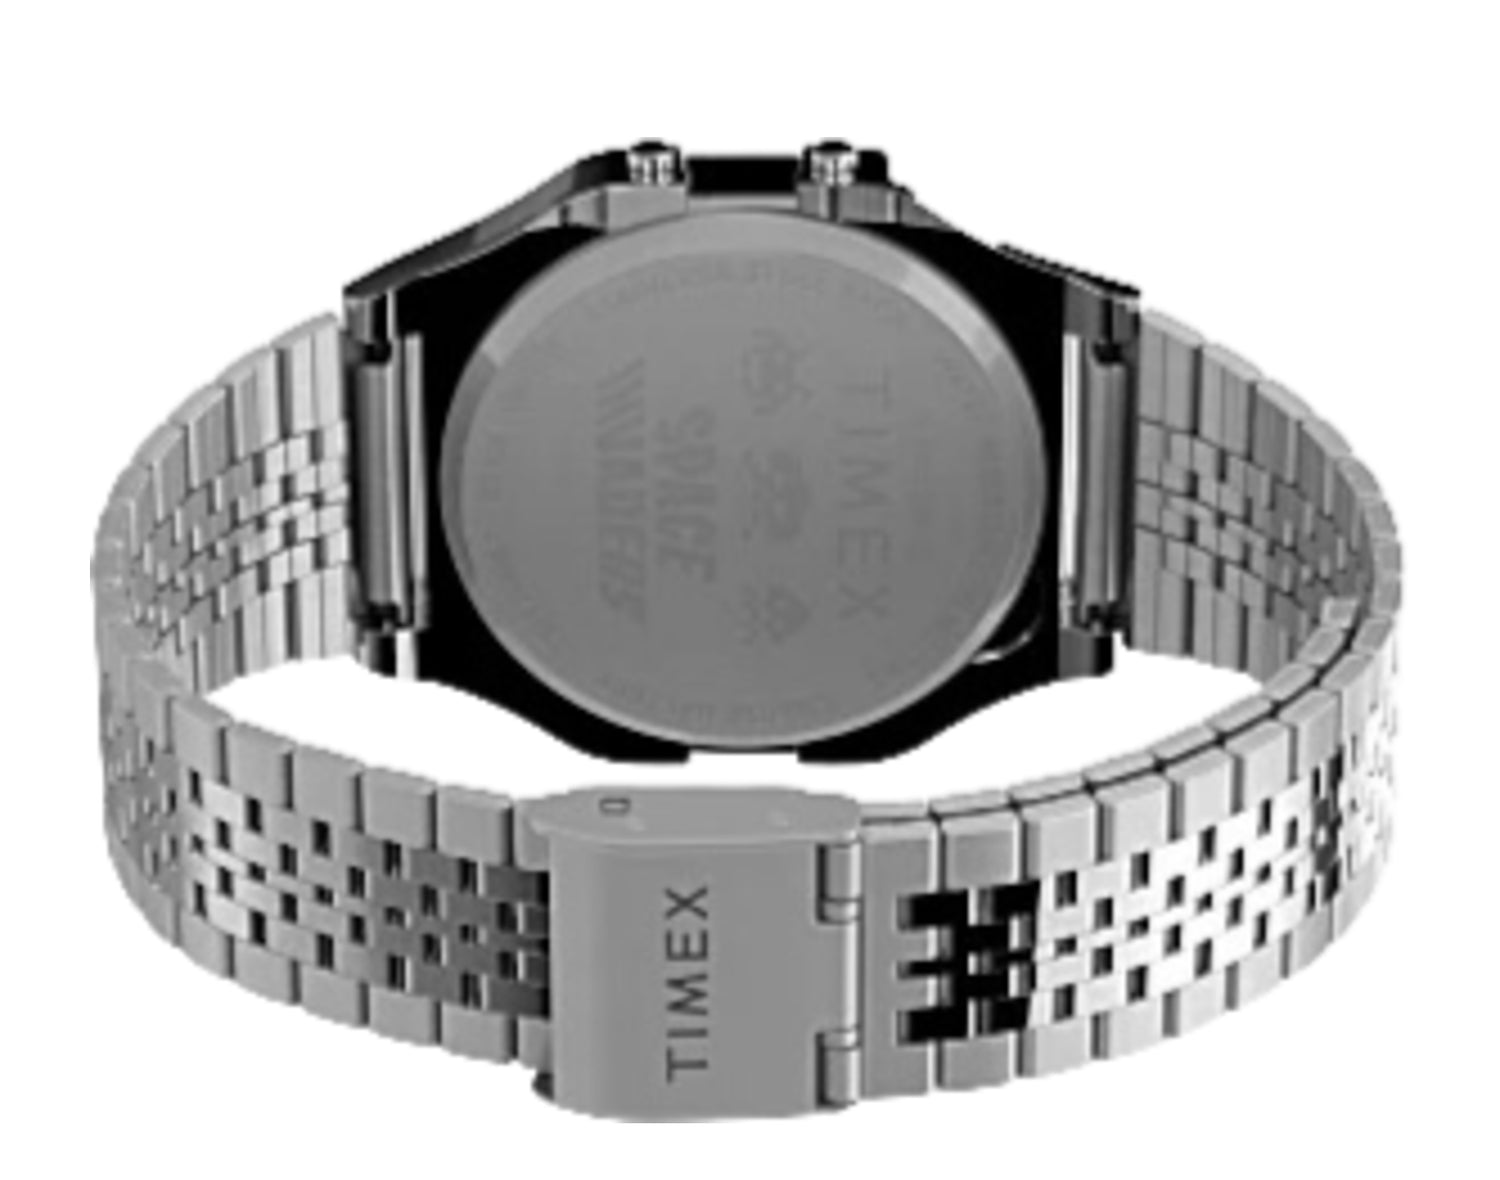 Timex T80 x Space Invaders 34mm Stainless Steel Bracelet Watch